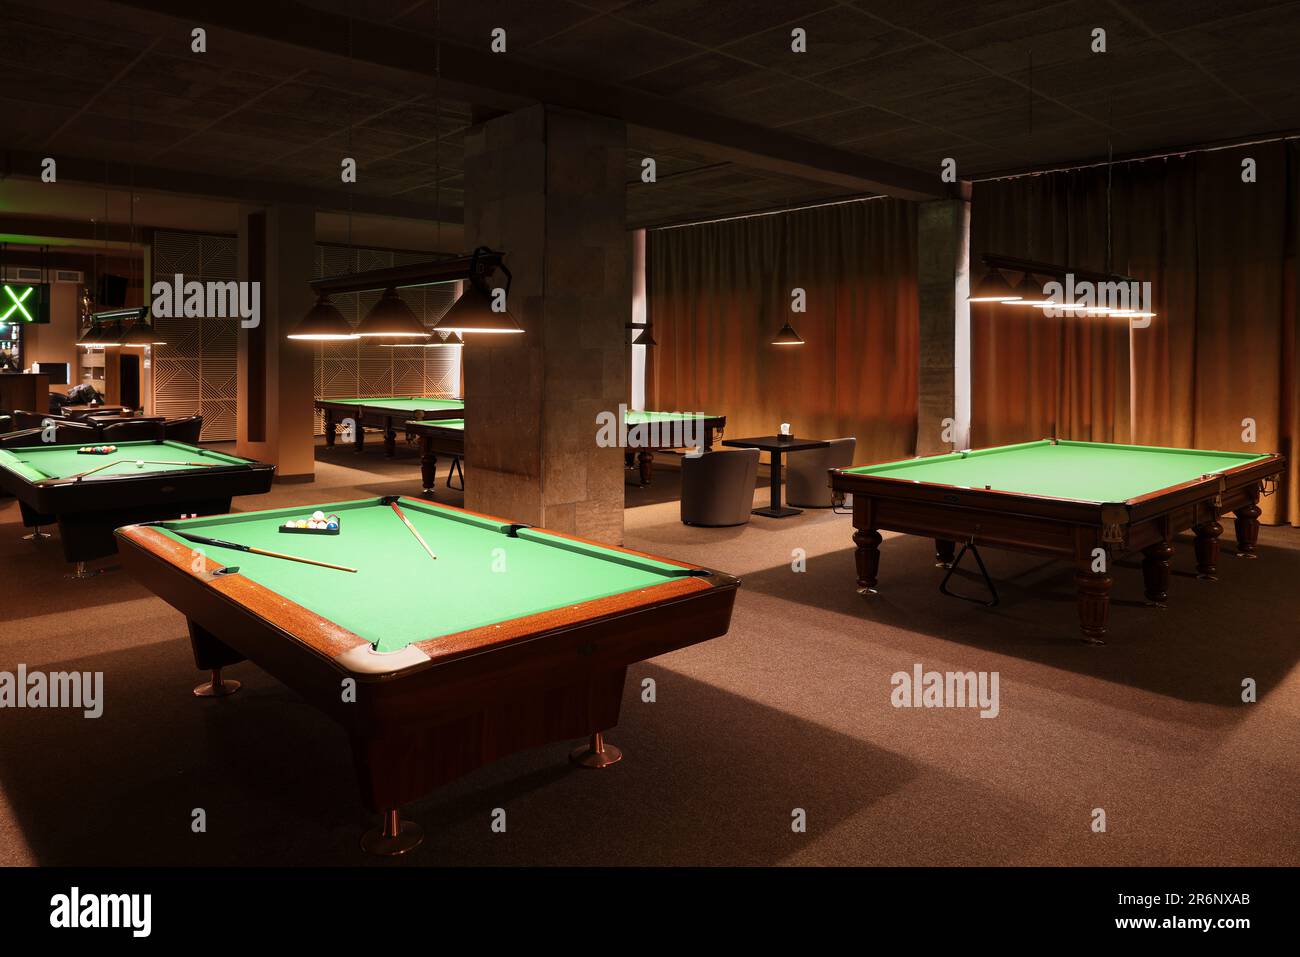 Billiard tables with balls and cues in club Stock Photo